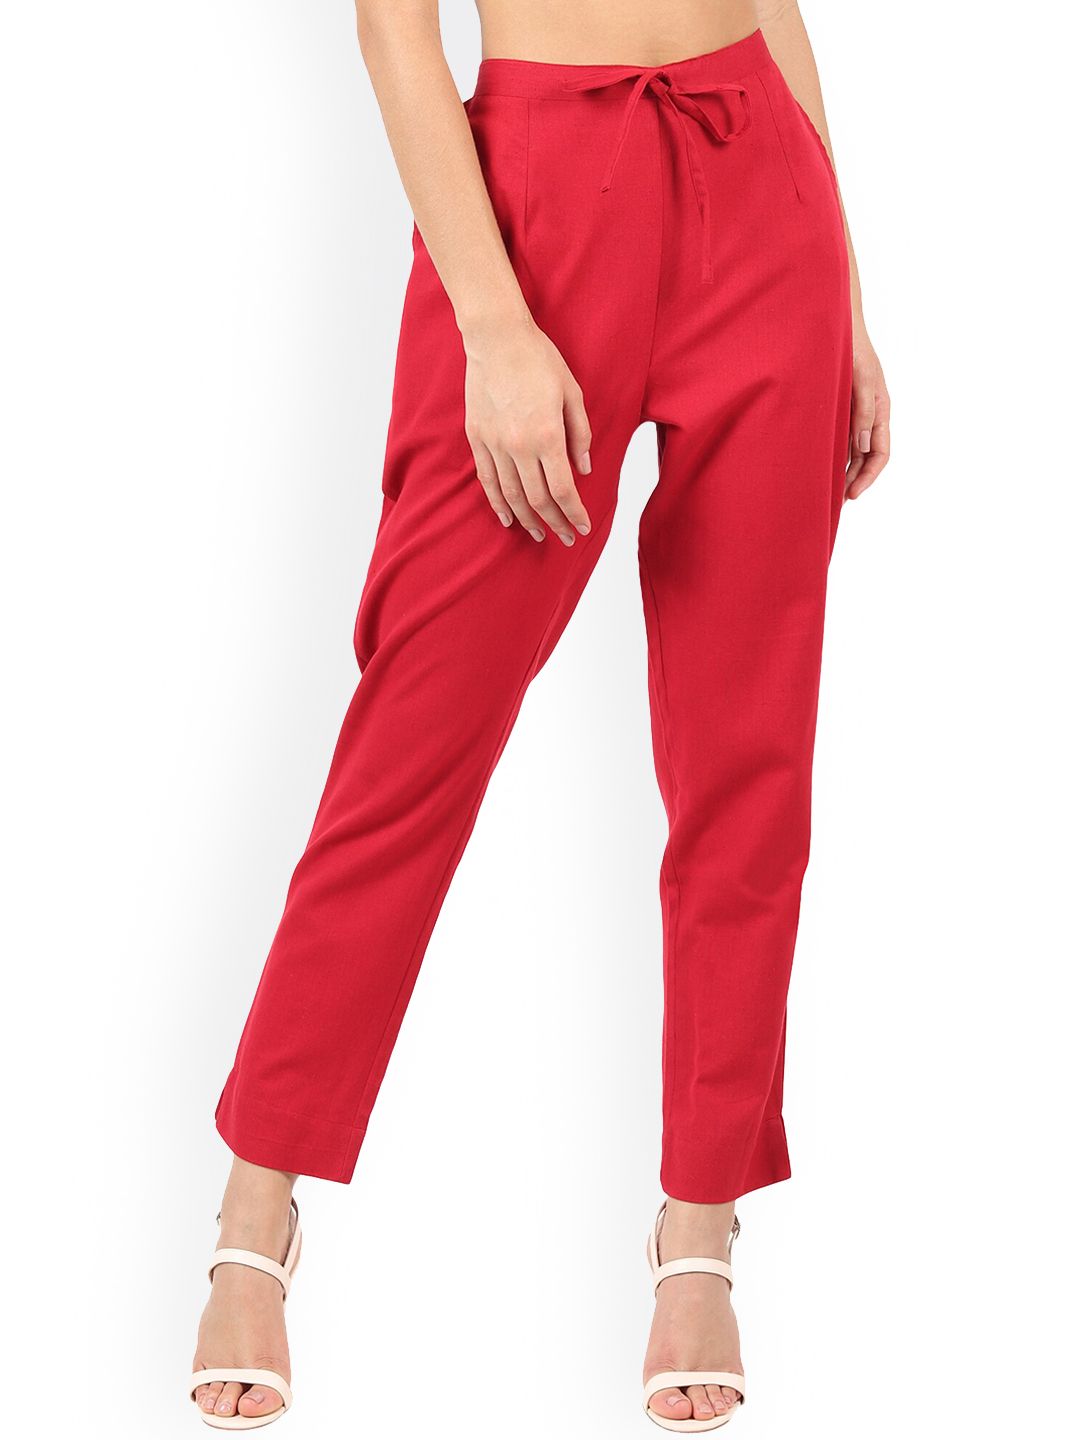 MUFFLY Women Maroon Cotton Flex Trousers Price in India